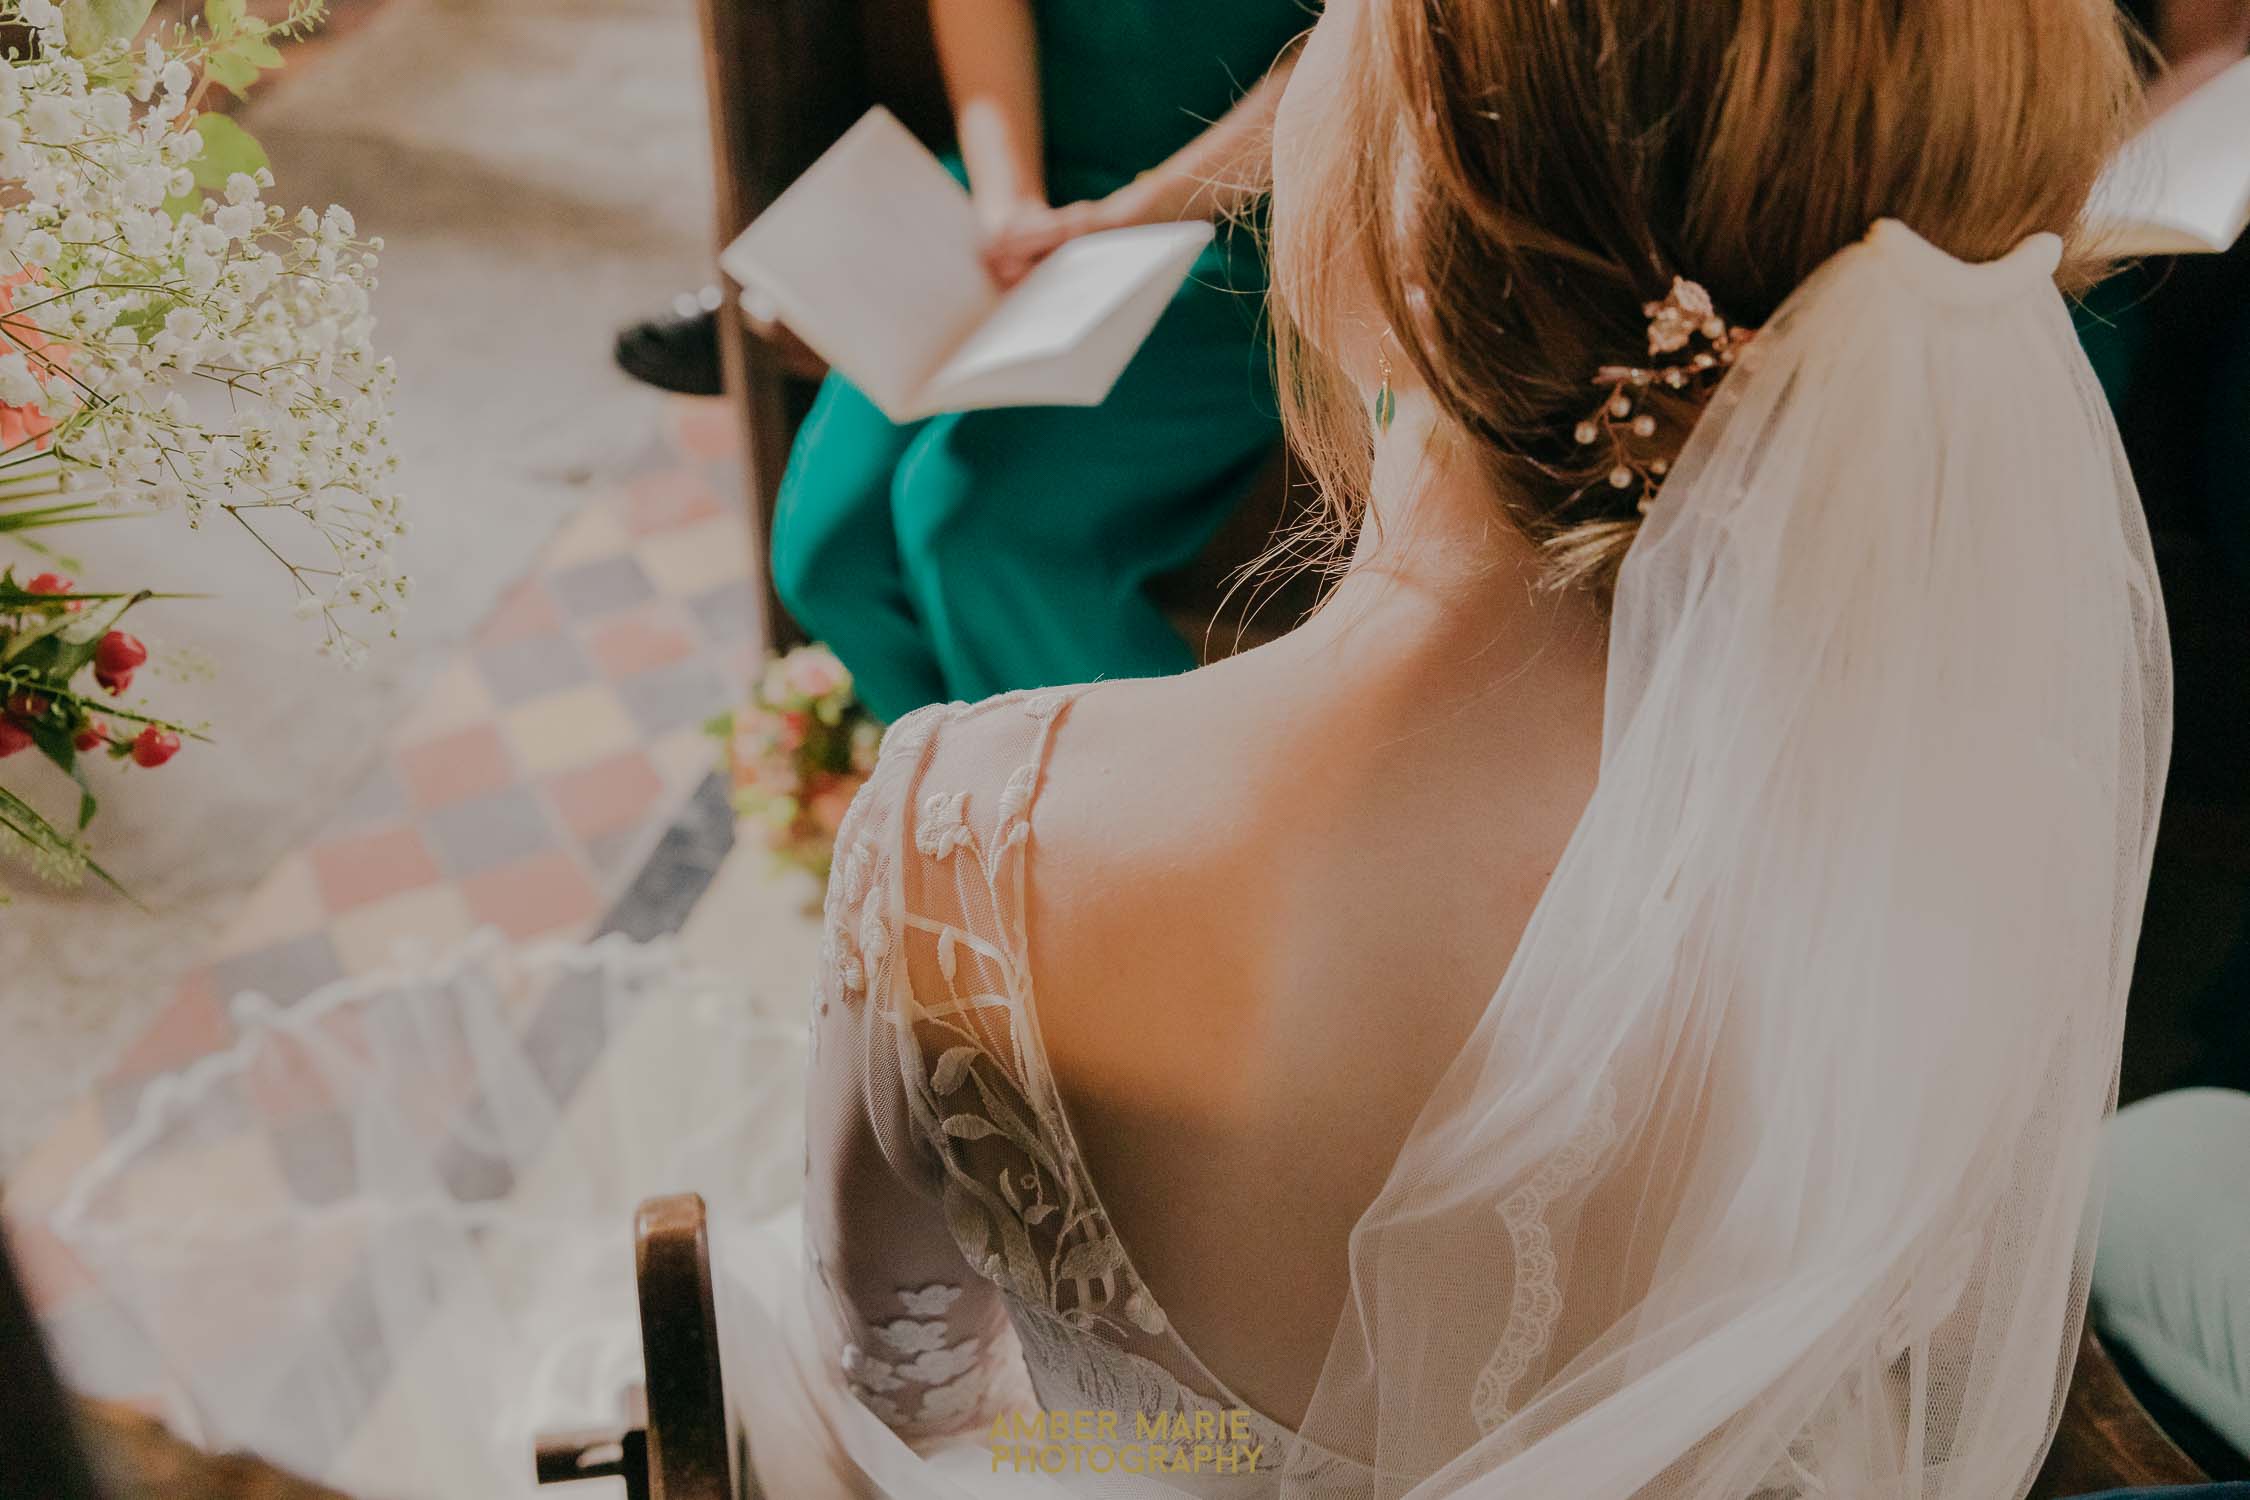 A bride sat down during a church ceremony